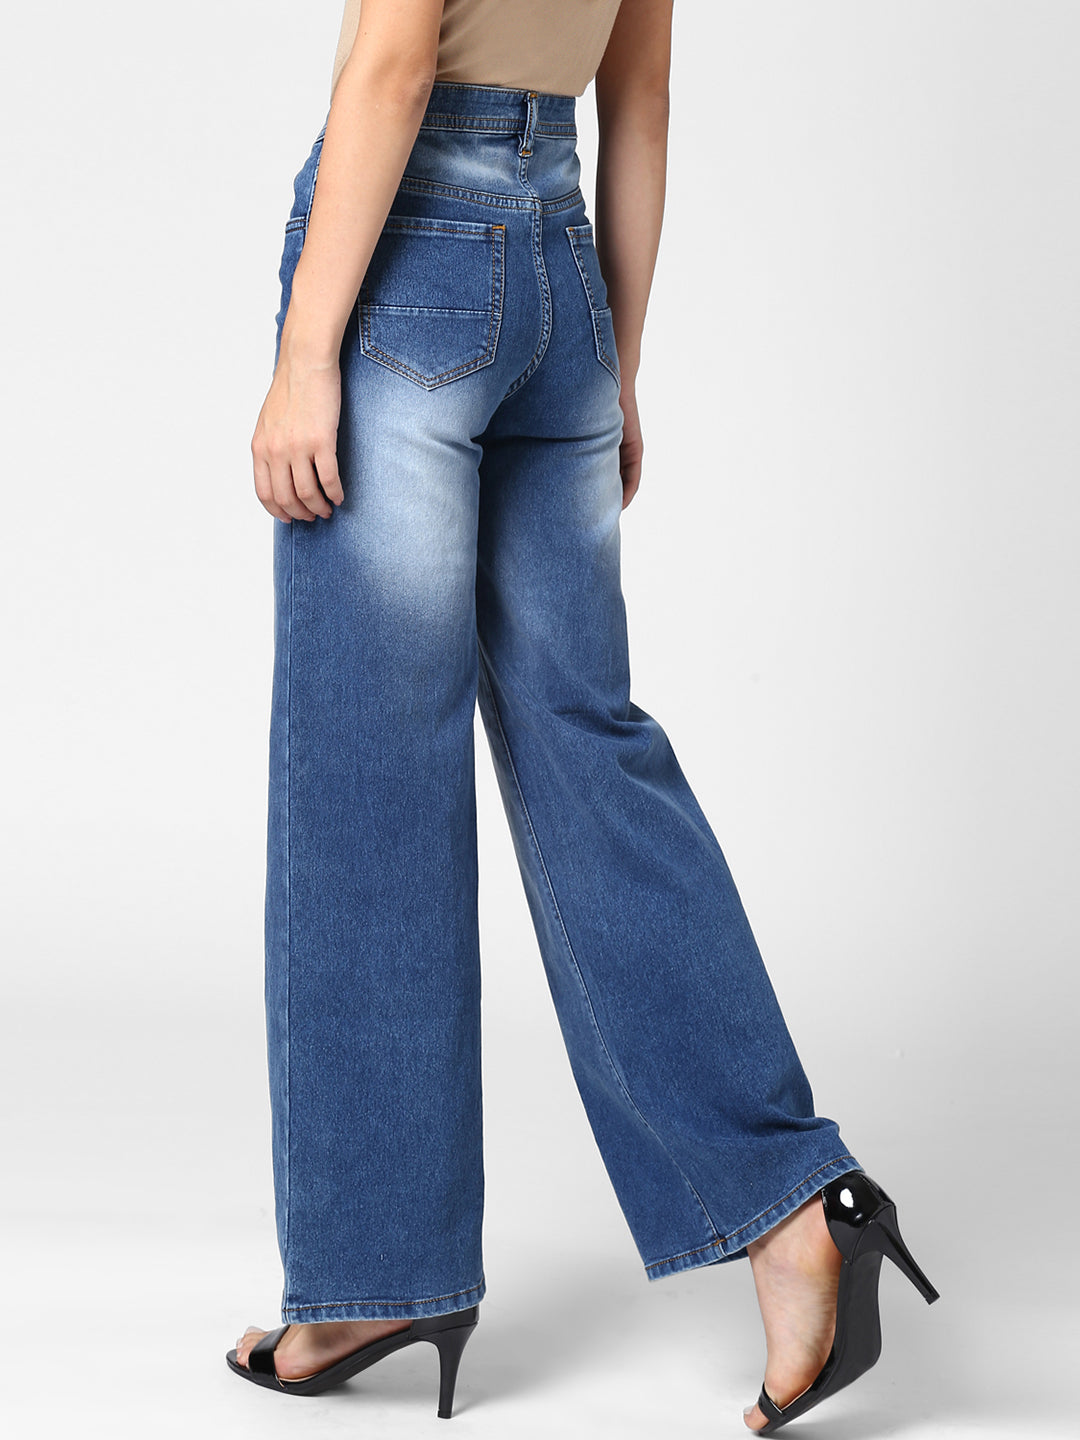 Women's Blue Flared Denim Jeans with washed effect